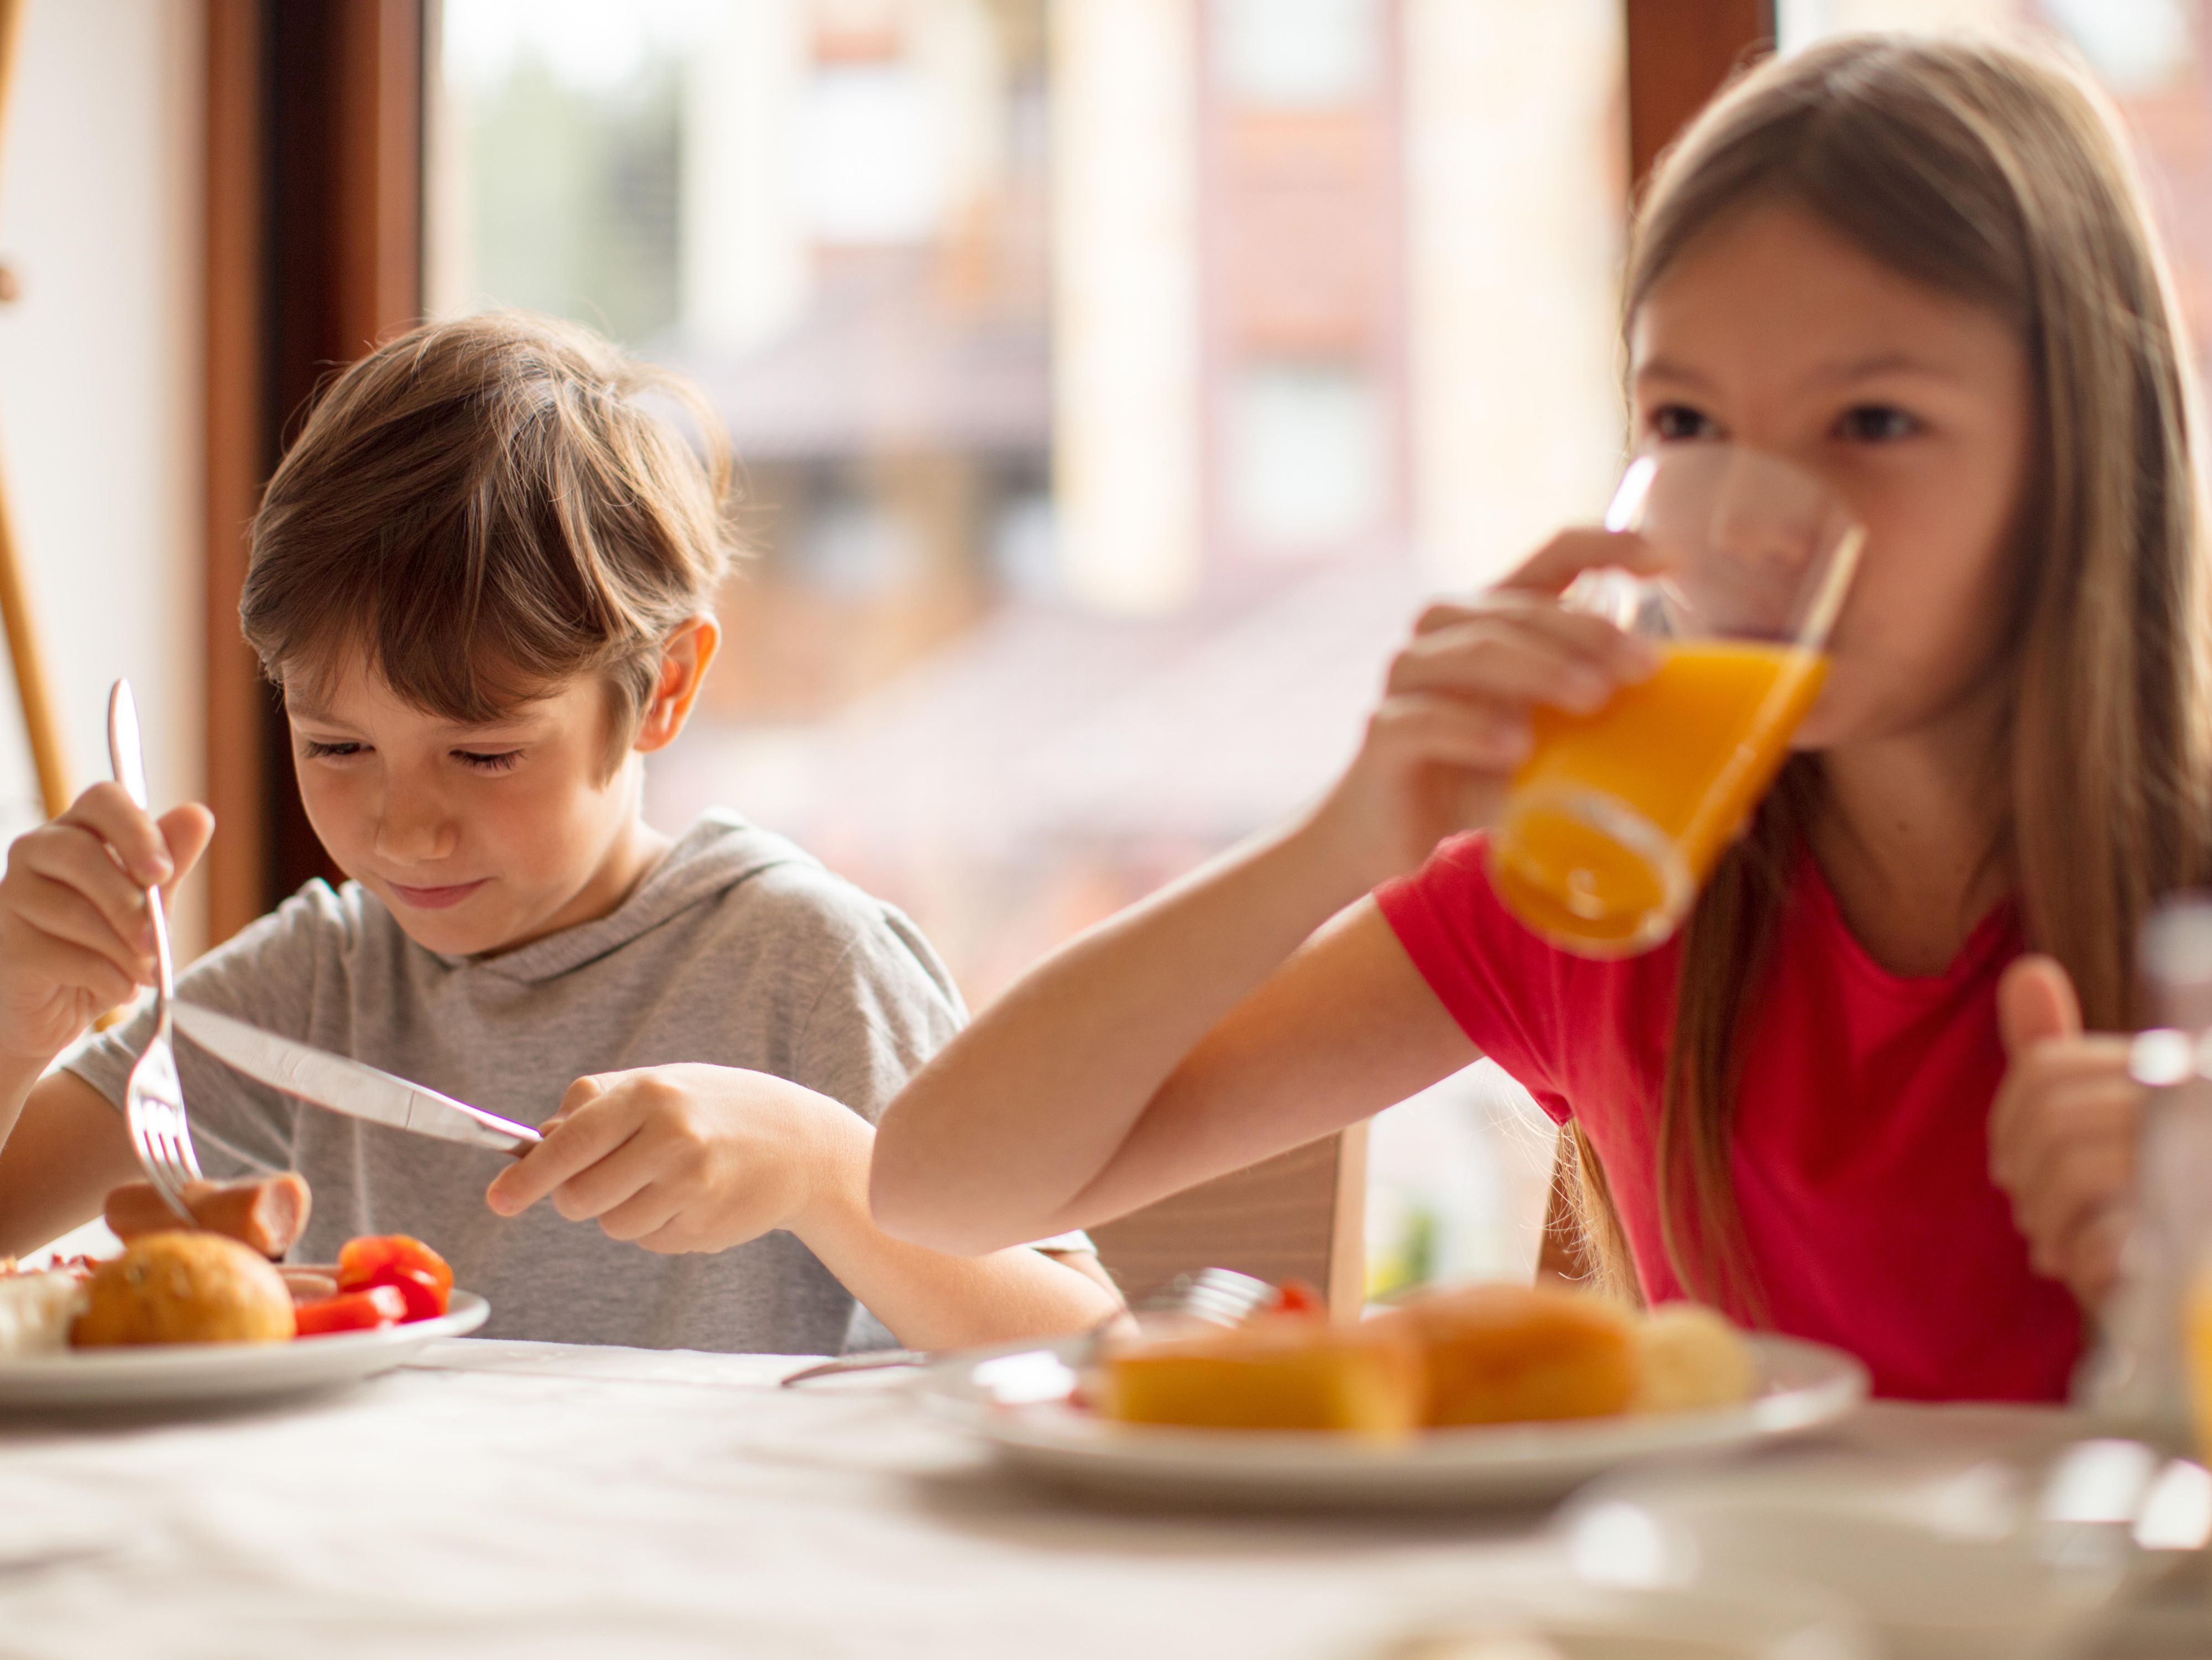 Kids eat free at our Orlando hotel! Up to two kids under 11 dine free per adult order from the main menu. Enjoy a buffet or a la carte breakfast at Trattoria Cafe and lite dinner options at Chianti's Lounge. Experience fun, family-friendly dining that won’t break the bank.